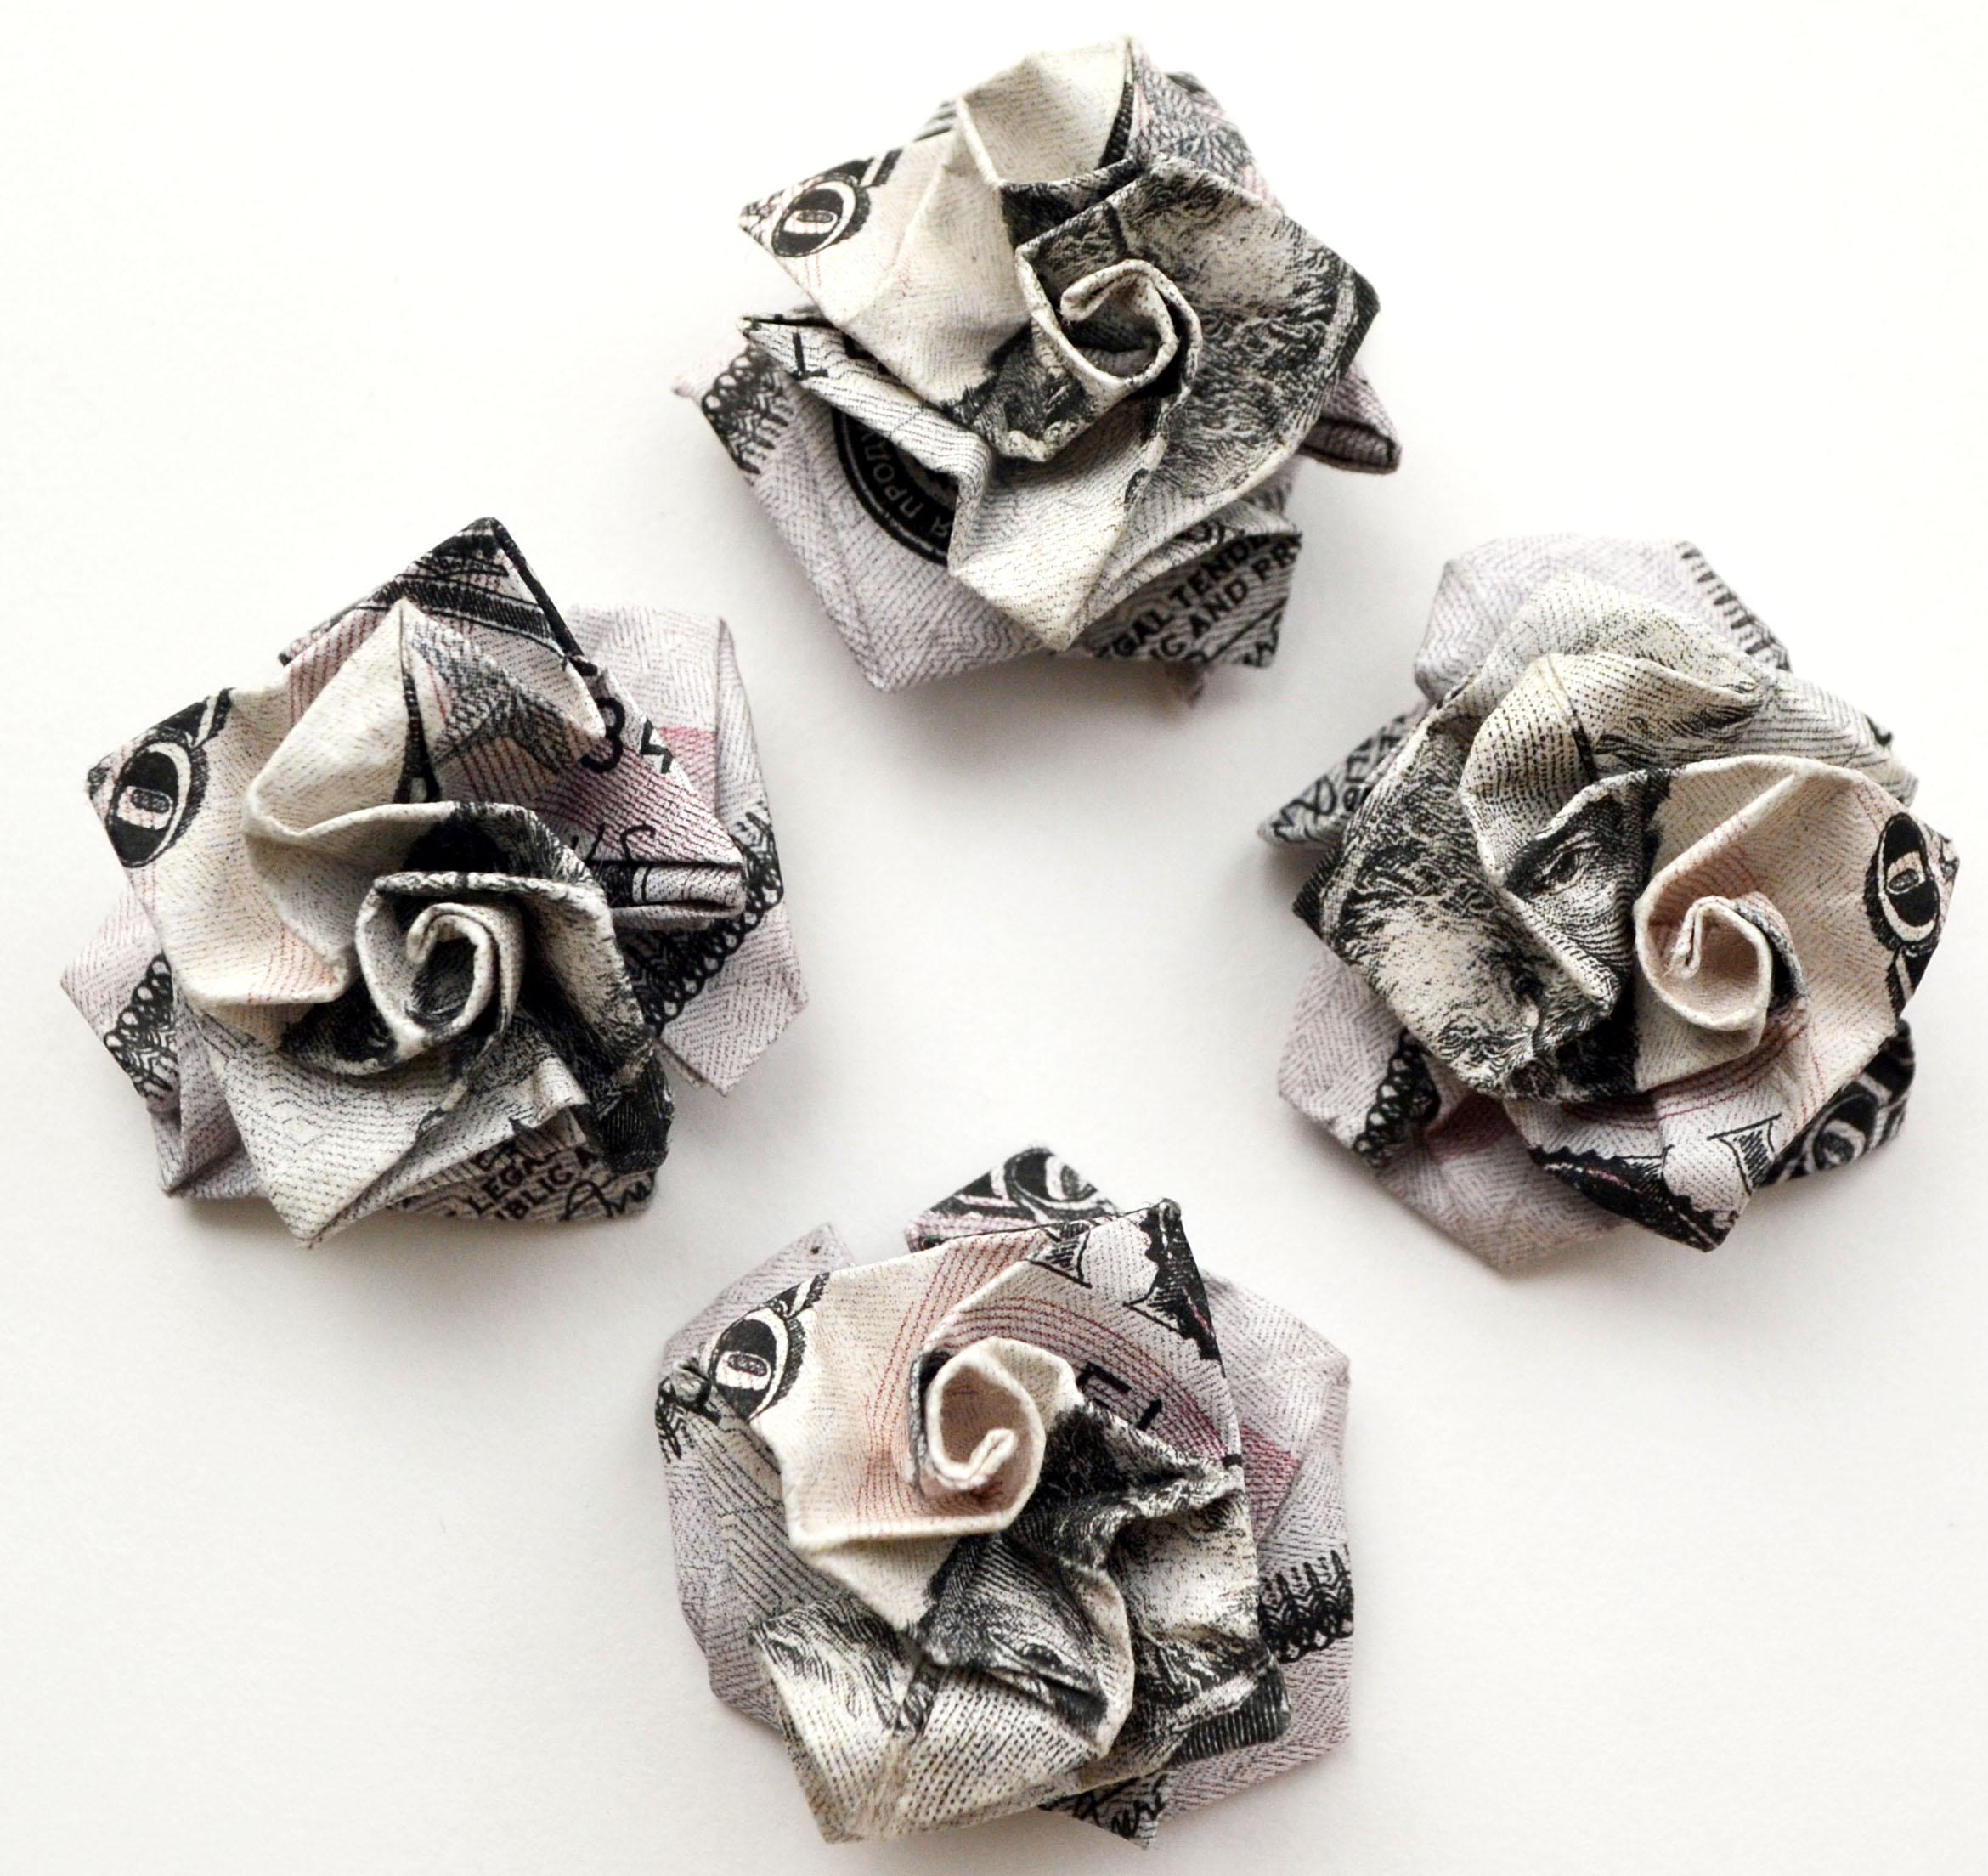 How To Make An Origami Rose Out Of Money 33 Startling Ideas Roses Out Of Money